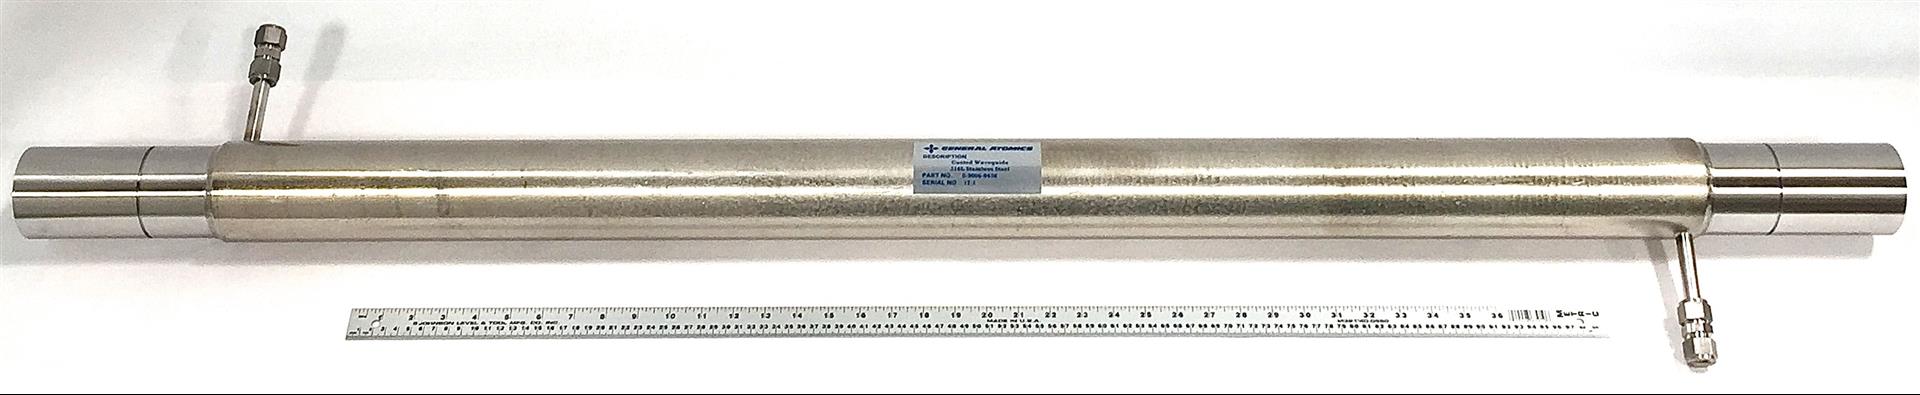 A corrugated 60.3-mm stainless steel waveguide 1.5 meters long